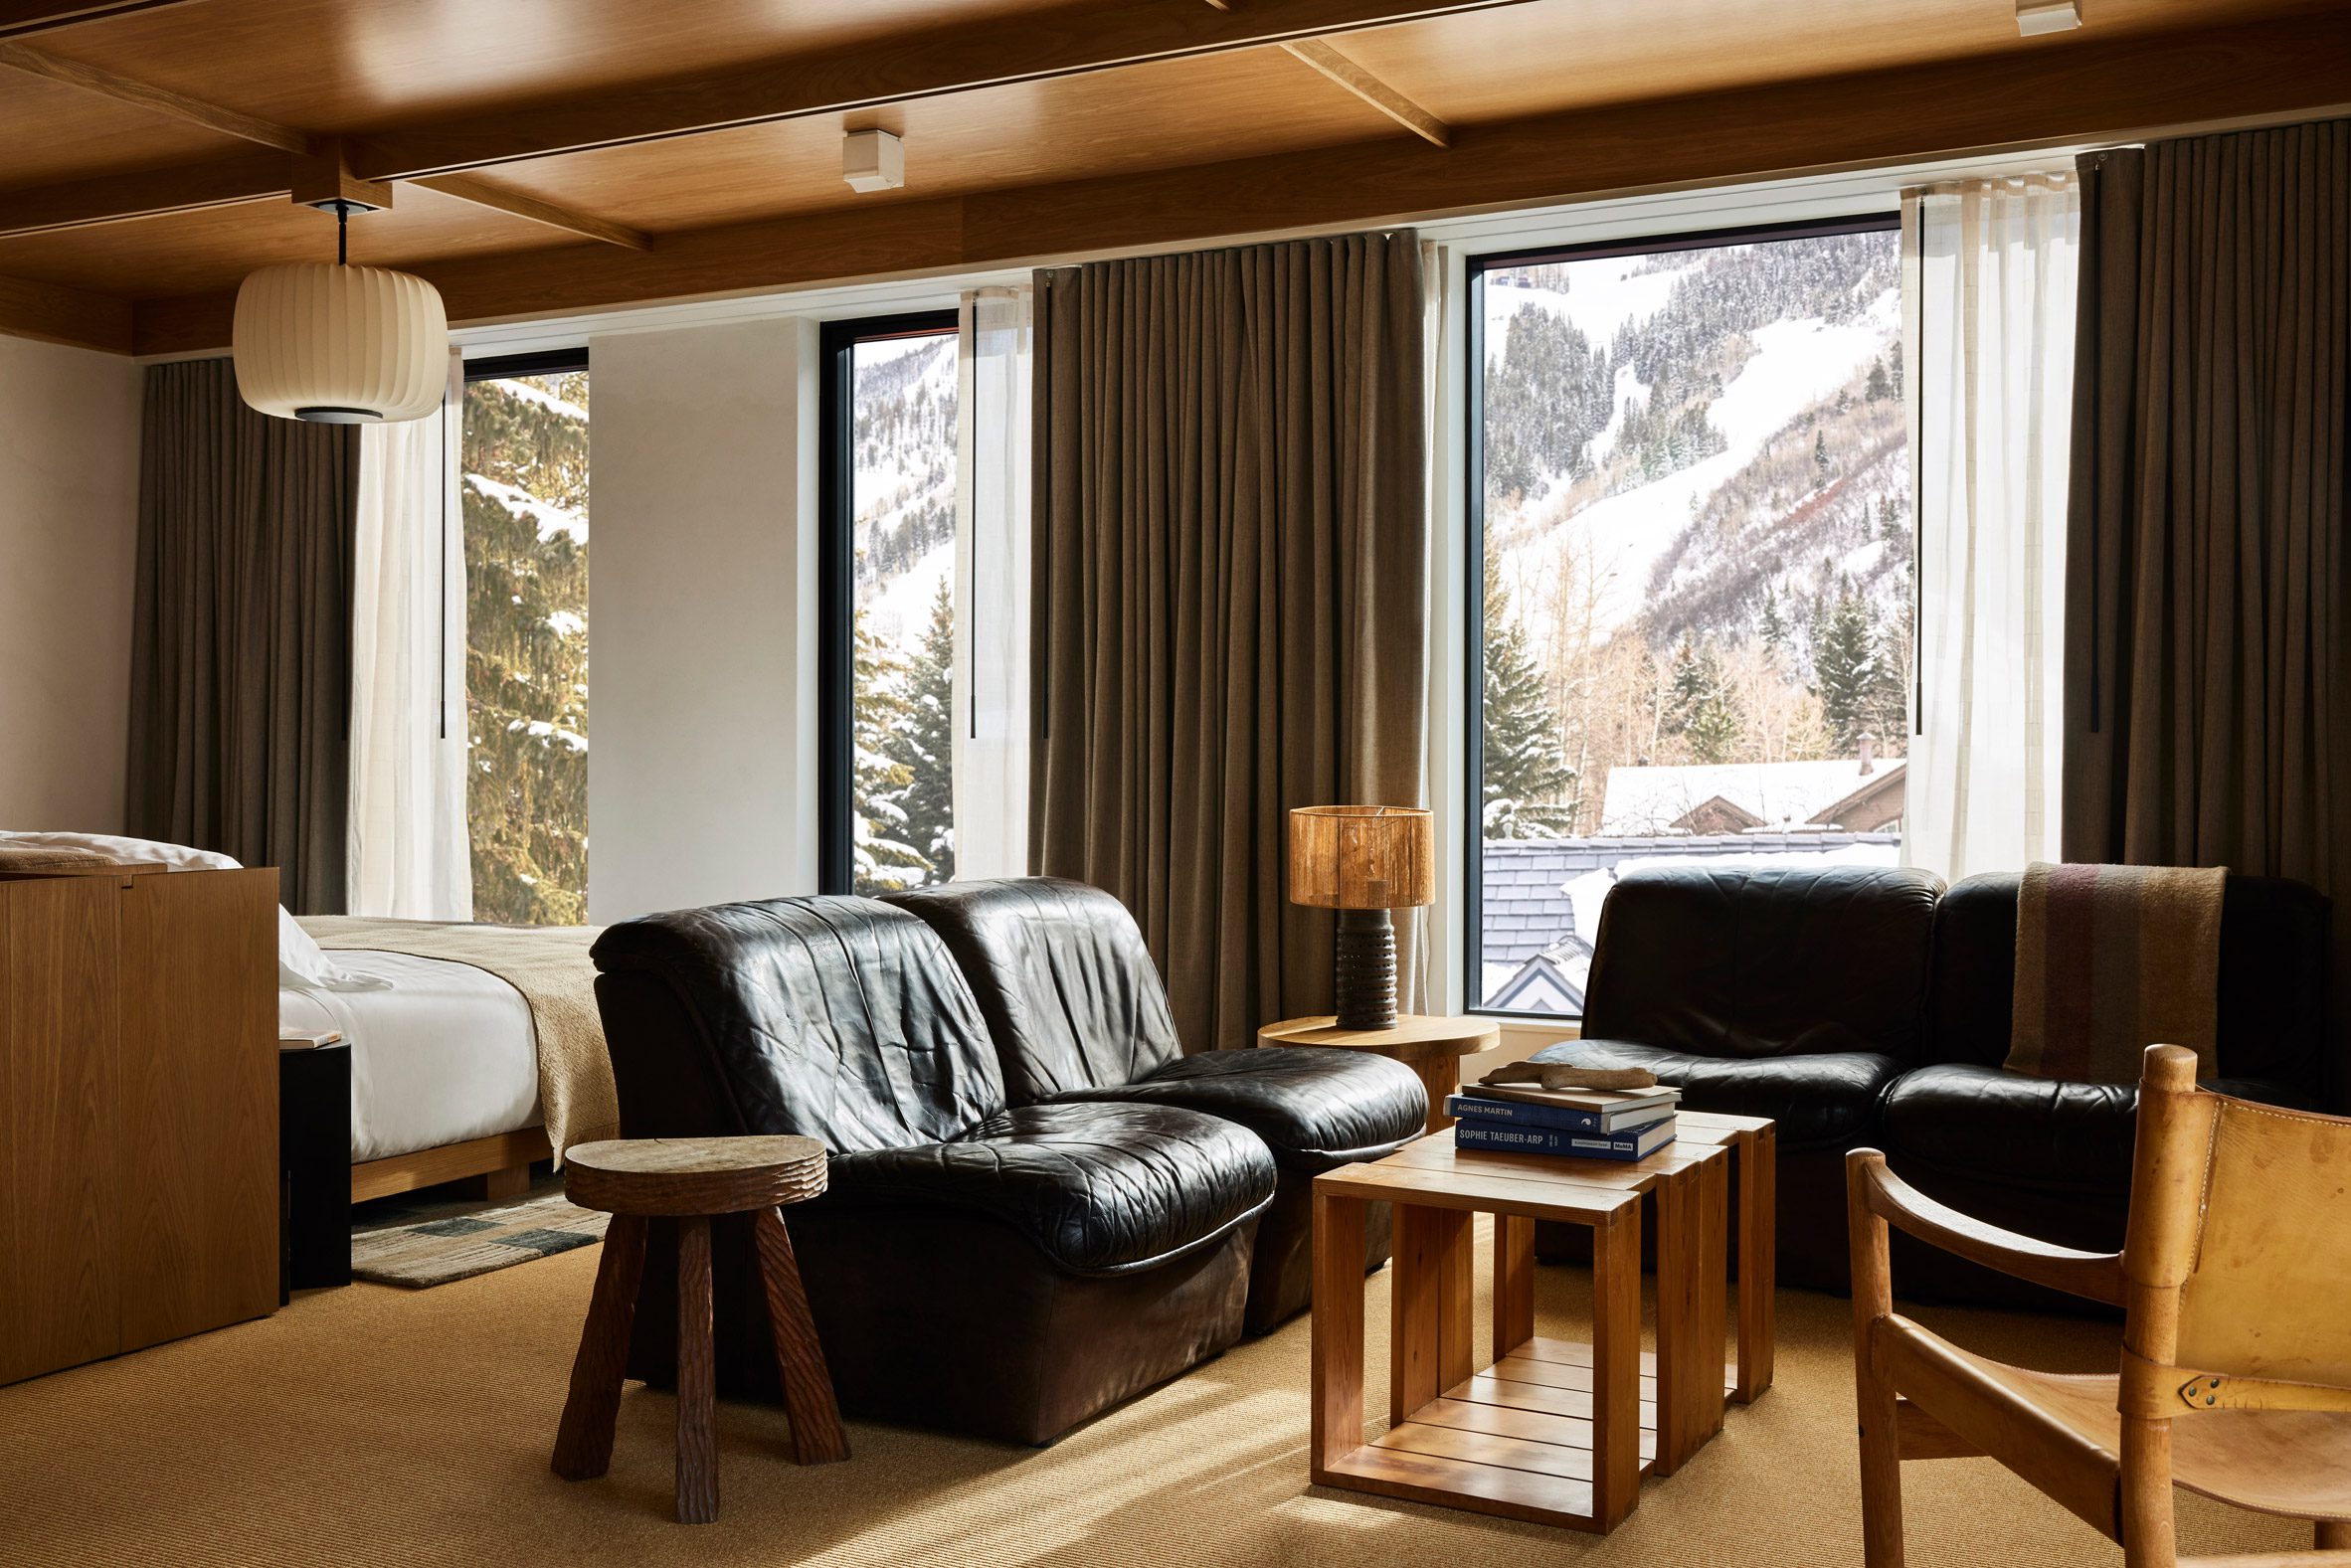 Guest suite with black leather furniture and snowy mountain views